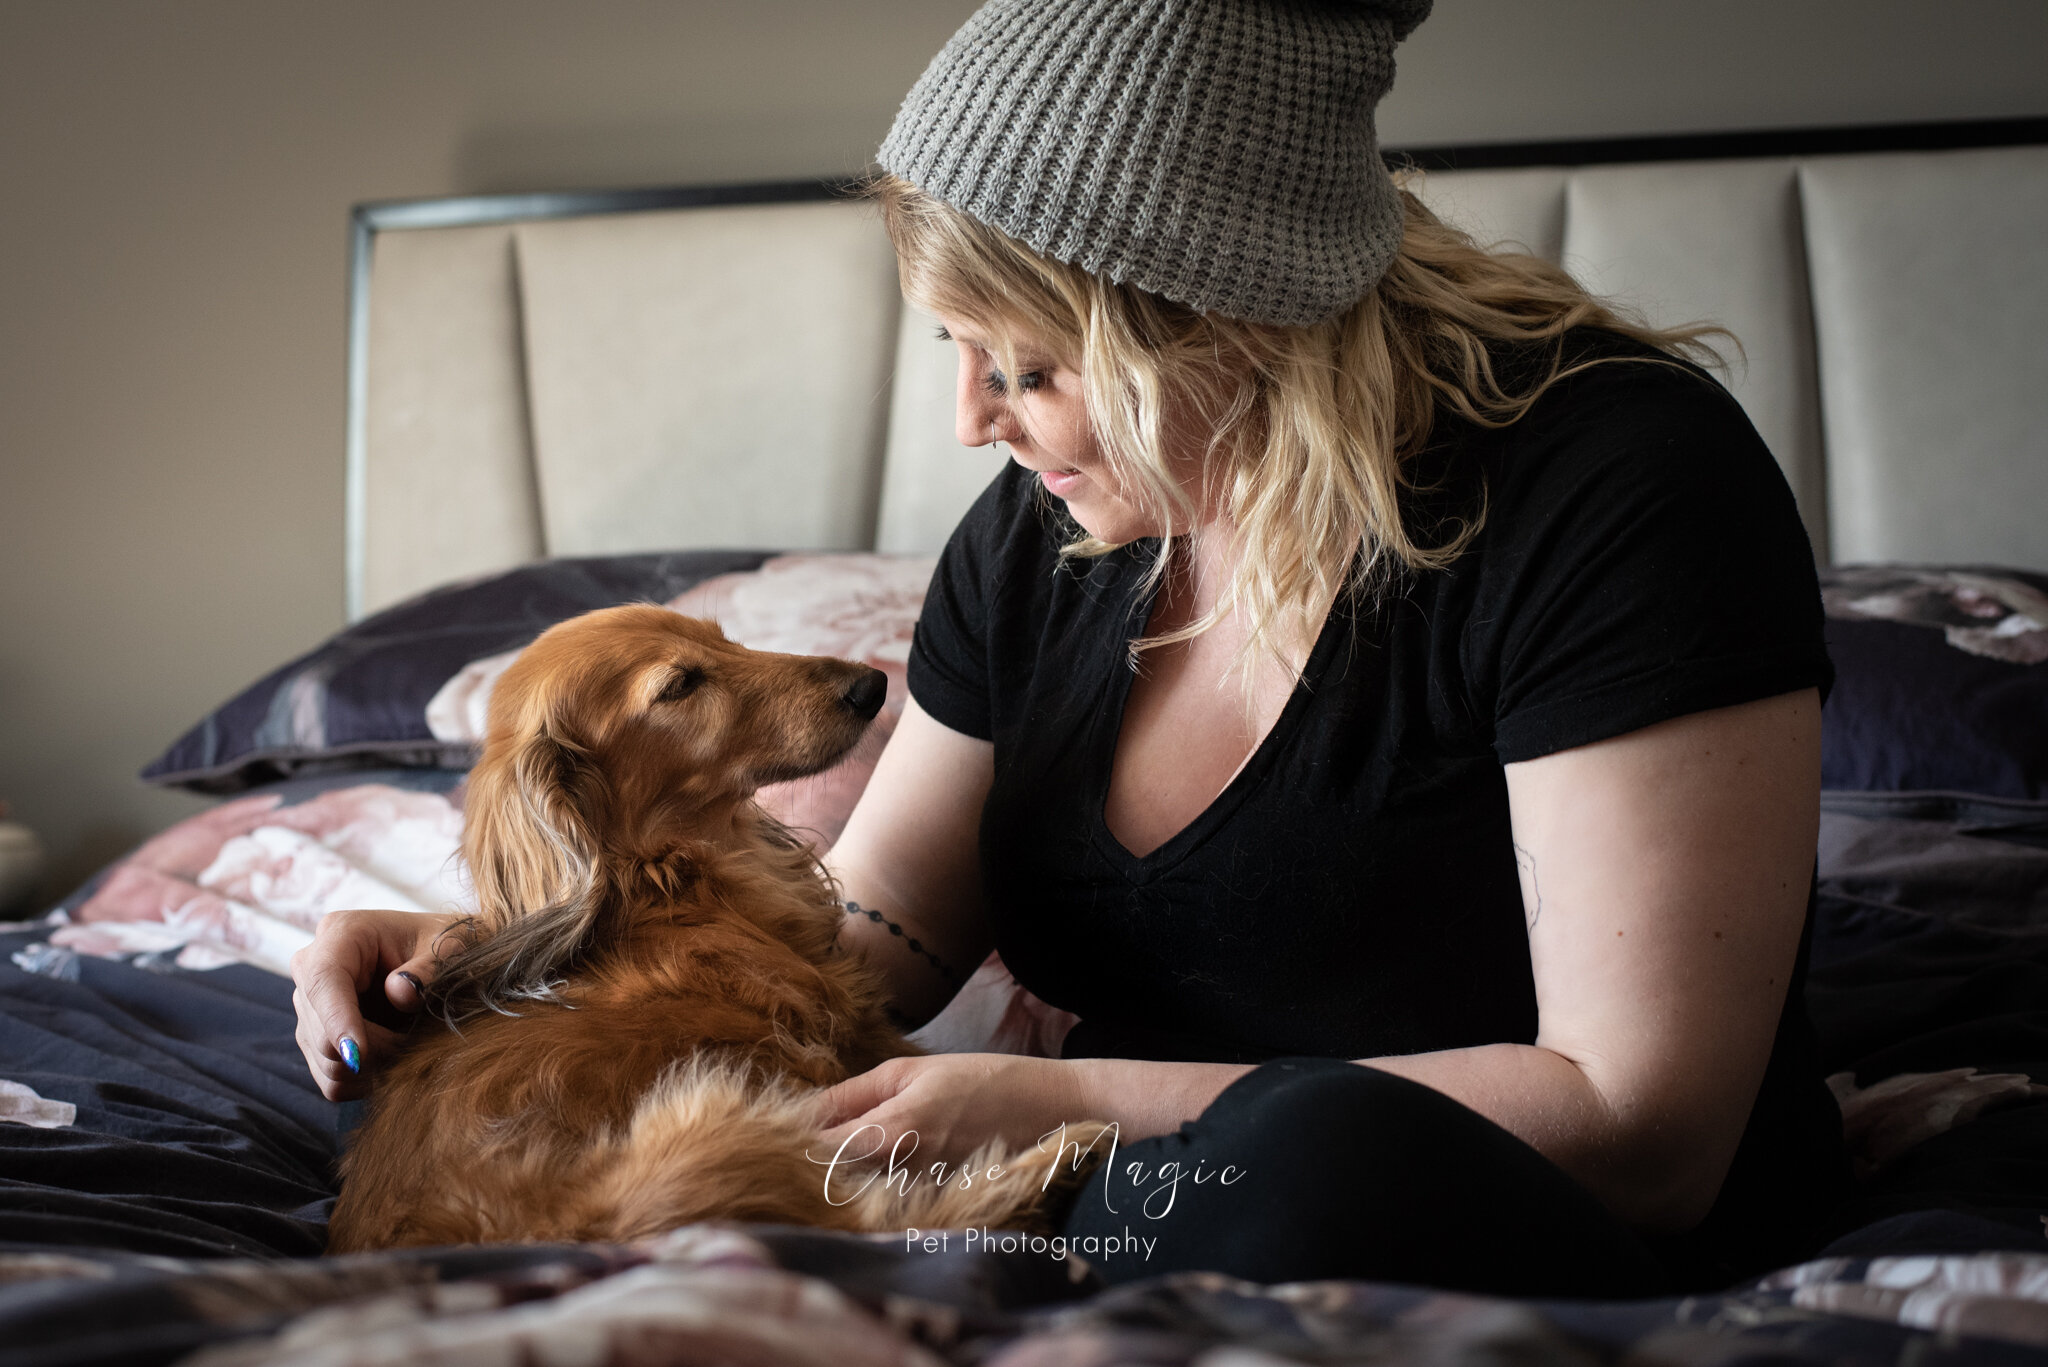 A small dog on the bed with a women in a hat